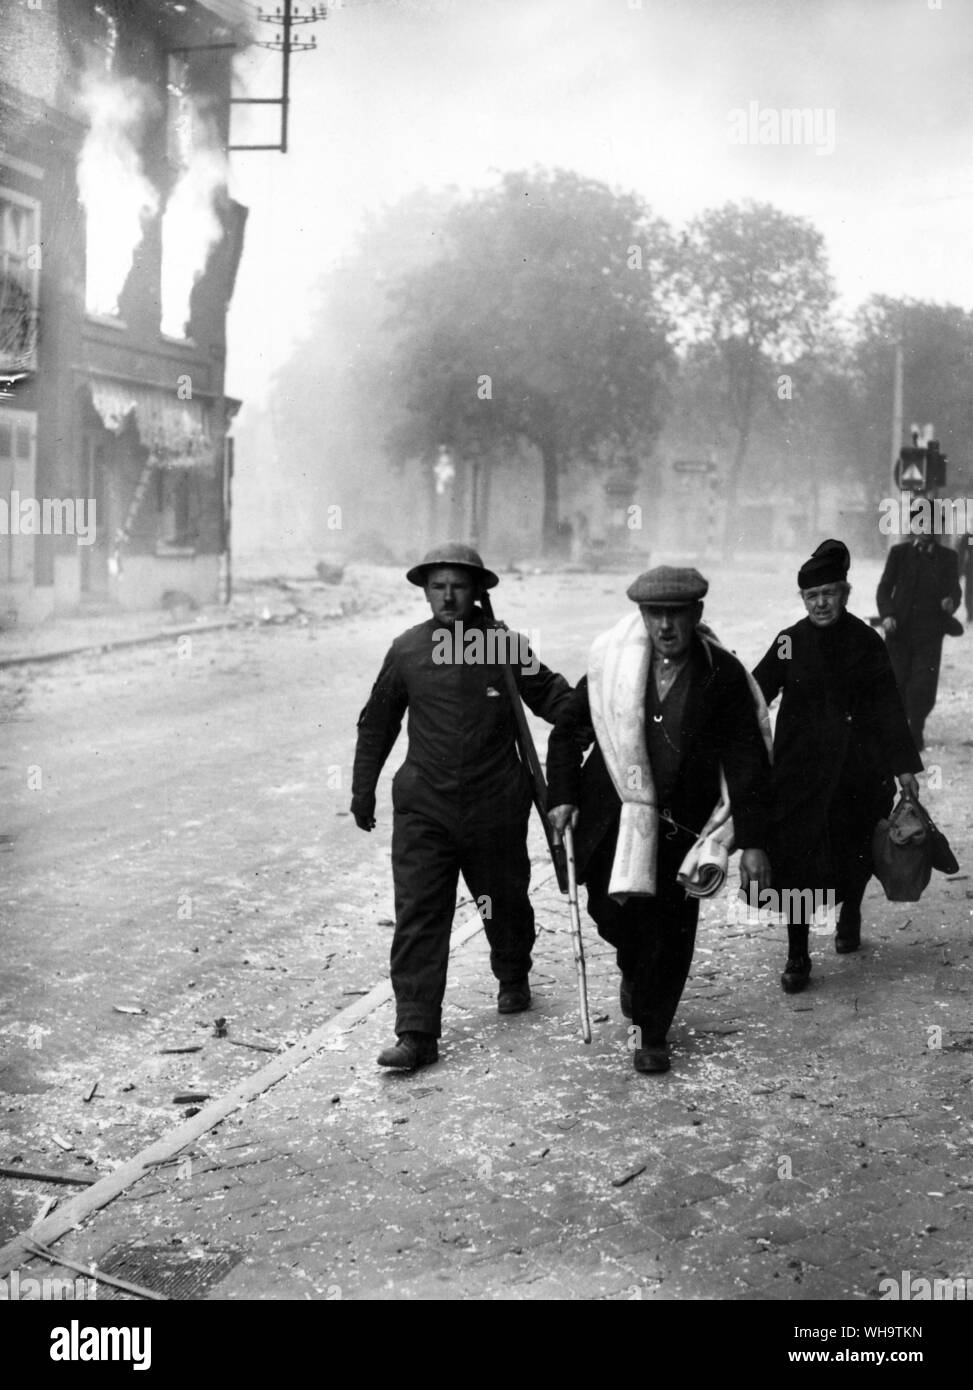 WW1/France: An allied soldier helps civilians away from burning buildings. Stock Photo